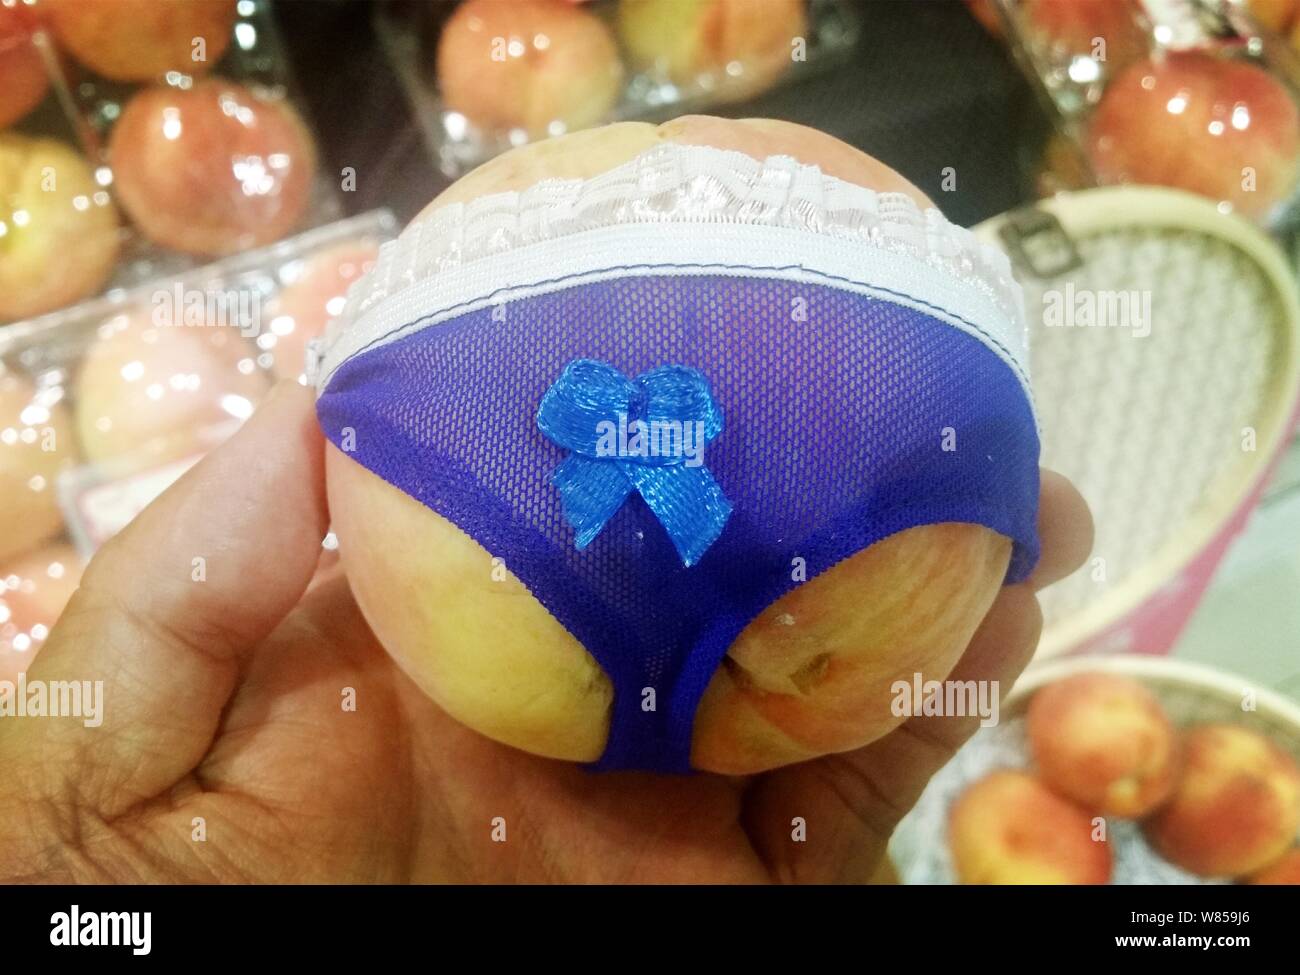 https://c8.alamy.com/comp/W859J6/a-customer-shows-a-panty-wearing-peach-at-a-fruit-shop-in-qingdao-city-east-chinas-shandong-province-16-august-2016-chinese-entrepreneurs-are-we-W859J6.jpg